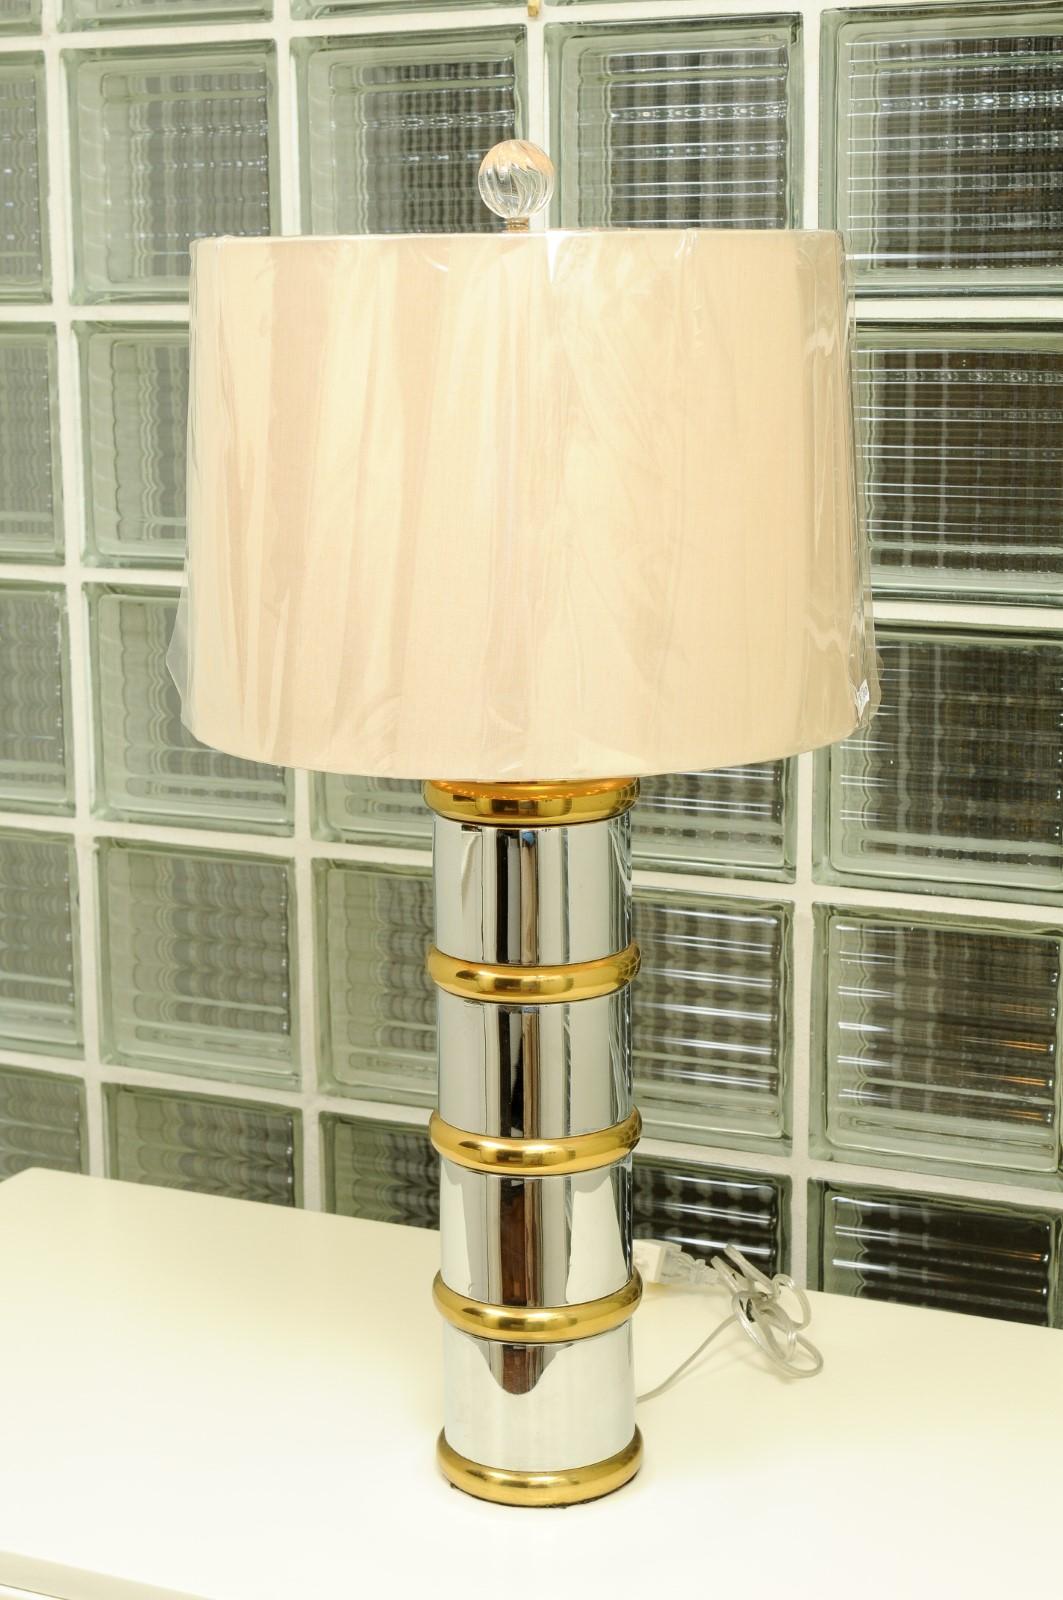 Stunning Pair of Faux-Bamboo Lamps in Chrome and Brass, Italy, circa 1970 In Excellent Condition For Sale In Atlanta, GA